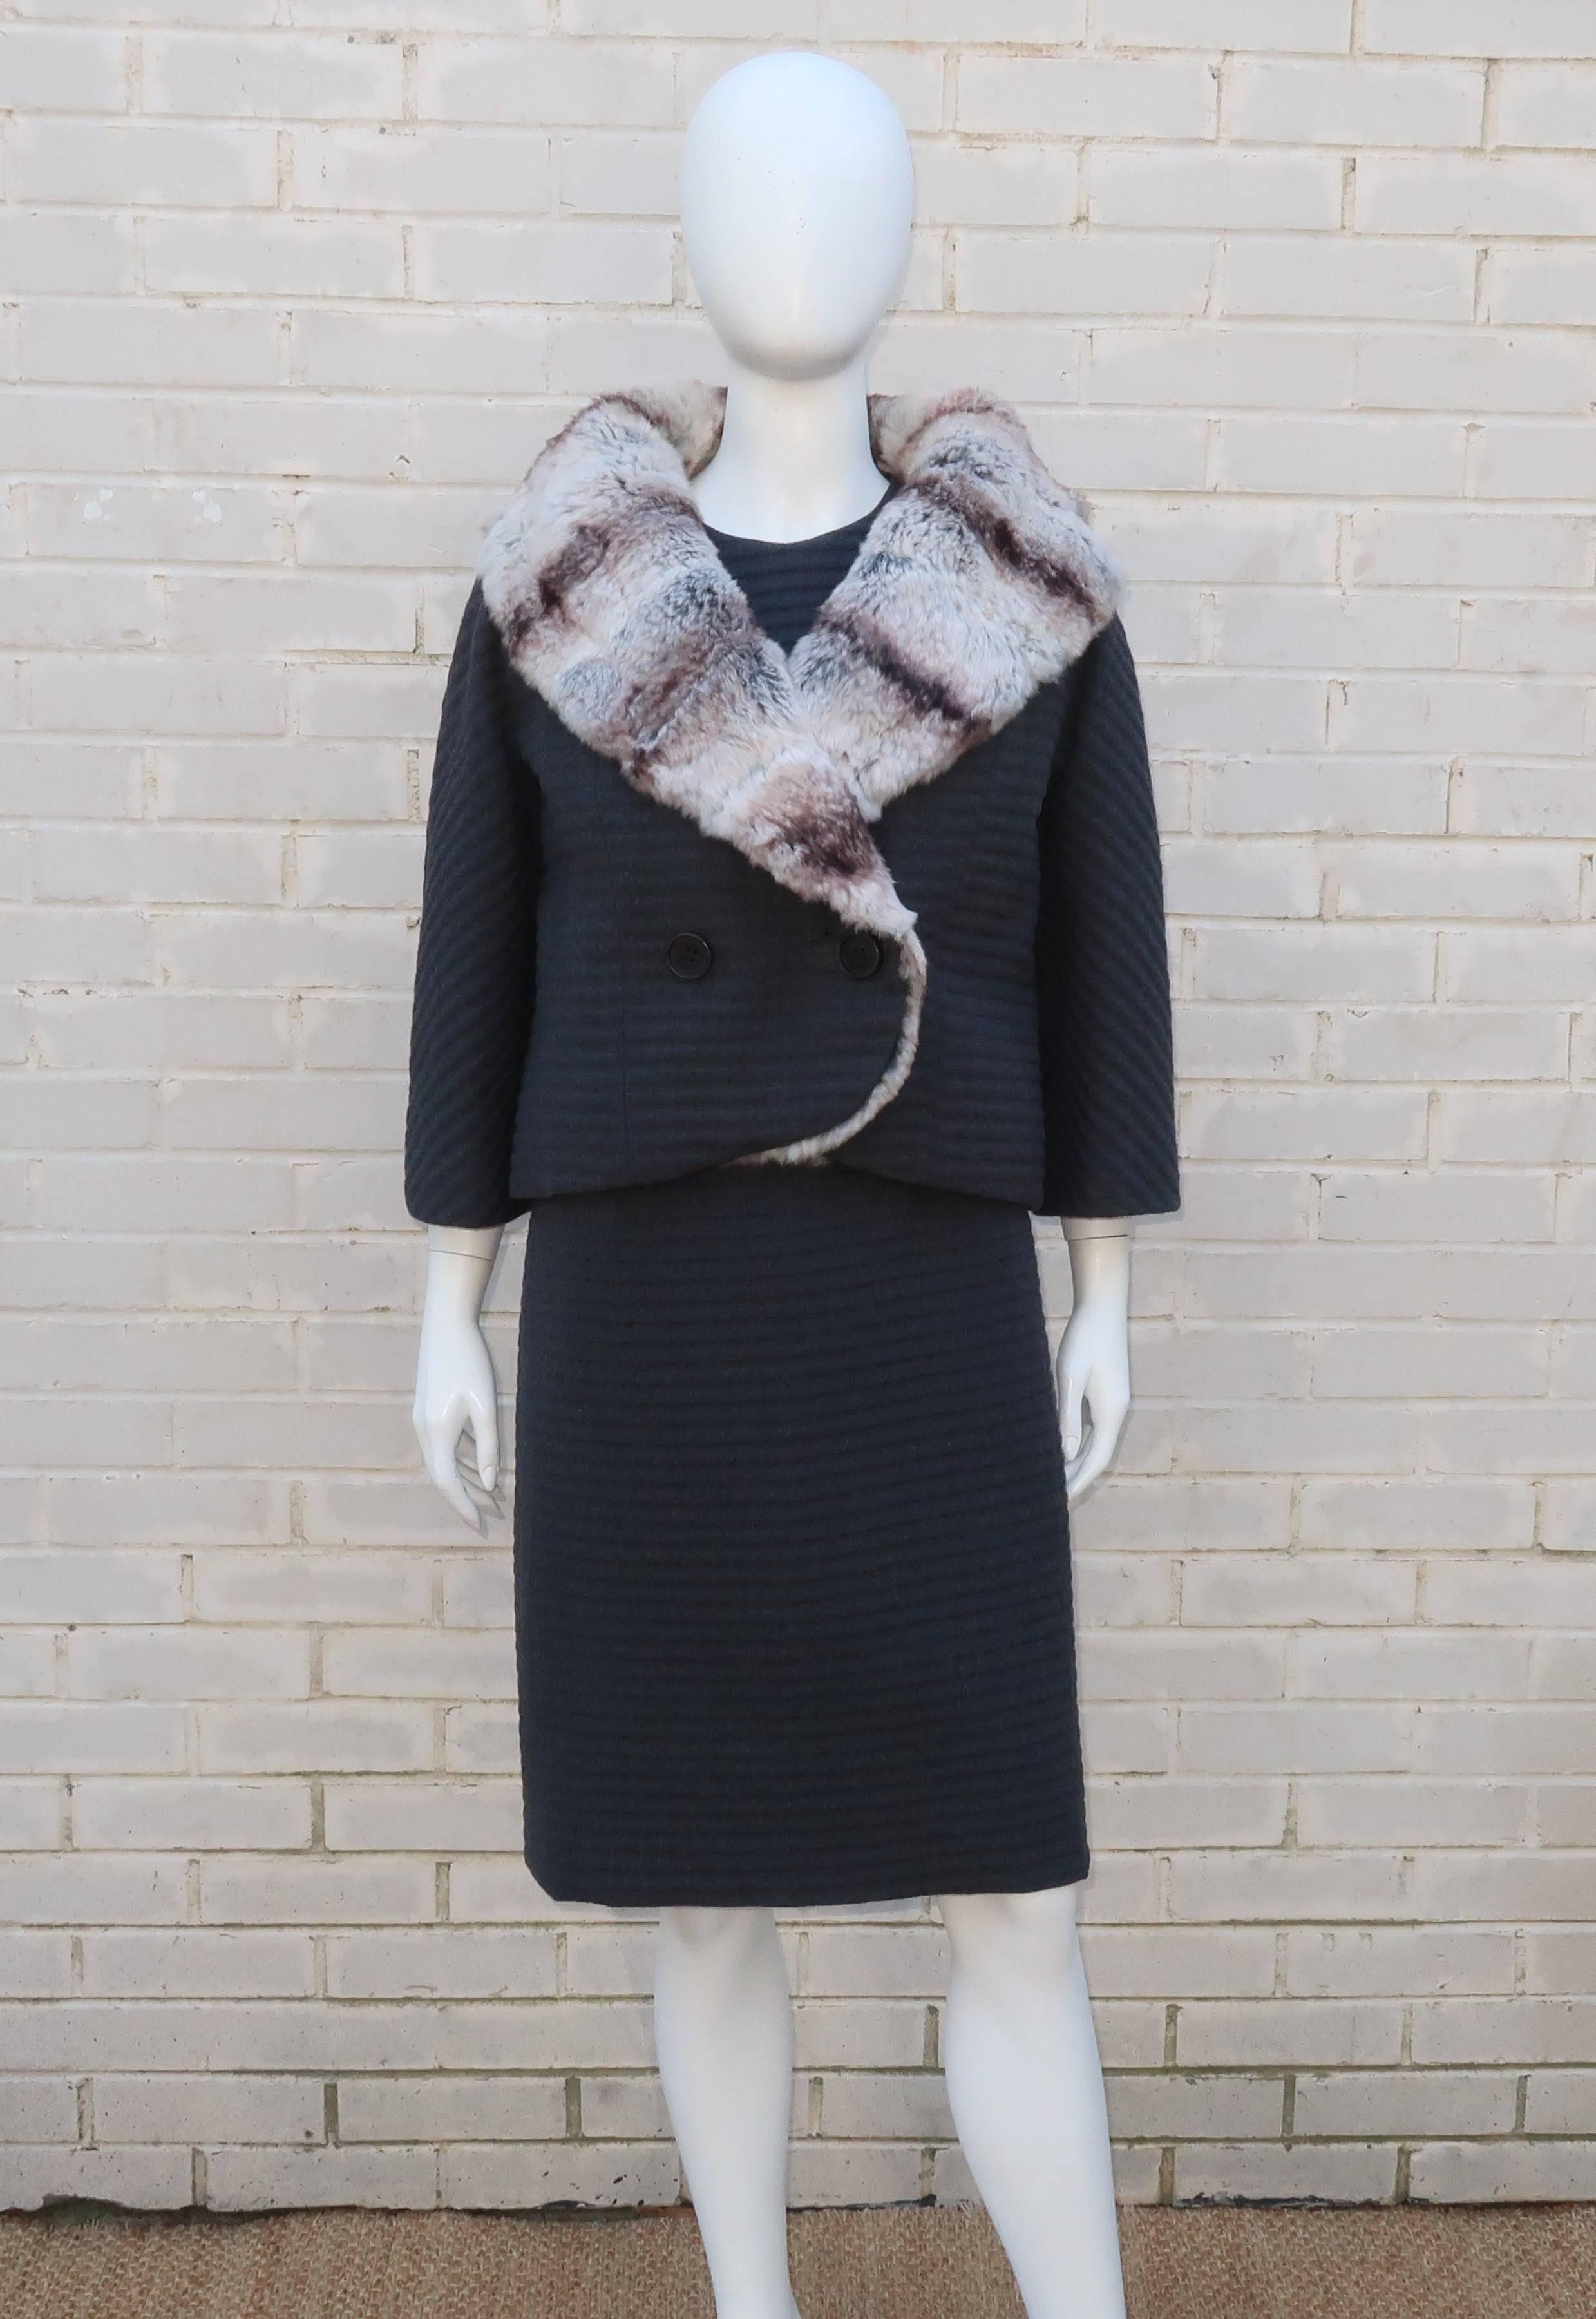 This two piece chinchilla fur lined jacket and dress ensemble is reminiscent of Alfred Hitchcock's heroines from the mid century...picture Eva Marie Saint, Tippi Hedren or Grace Kelly, to name a few. Classy, cool and ladylike! Both pieces are a